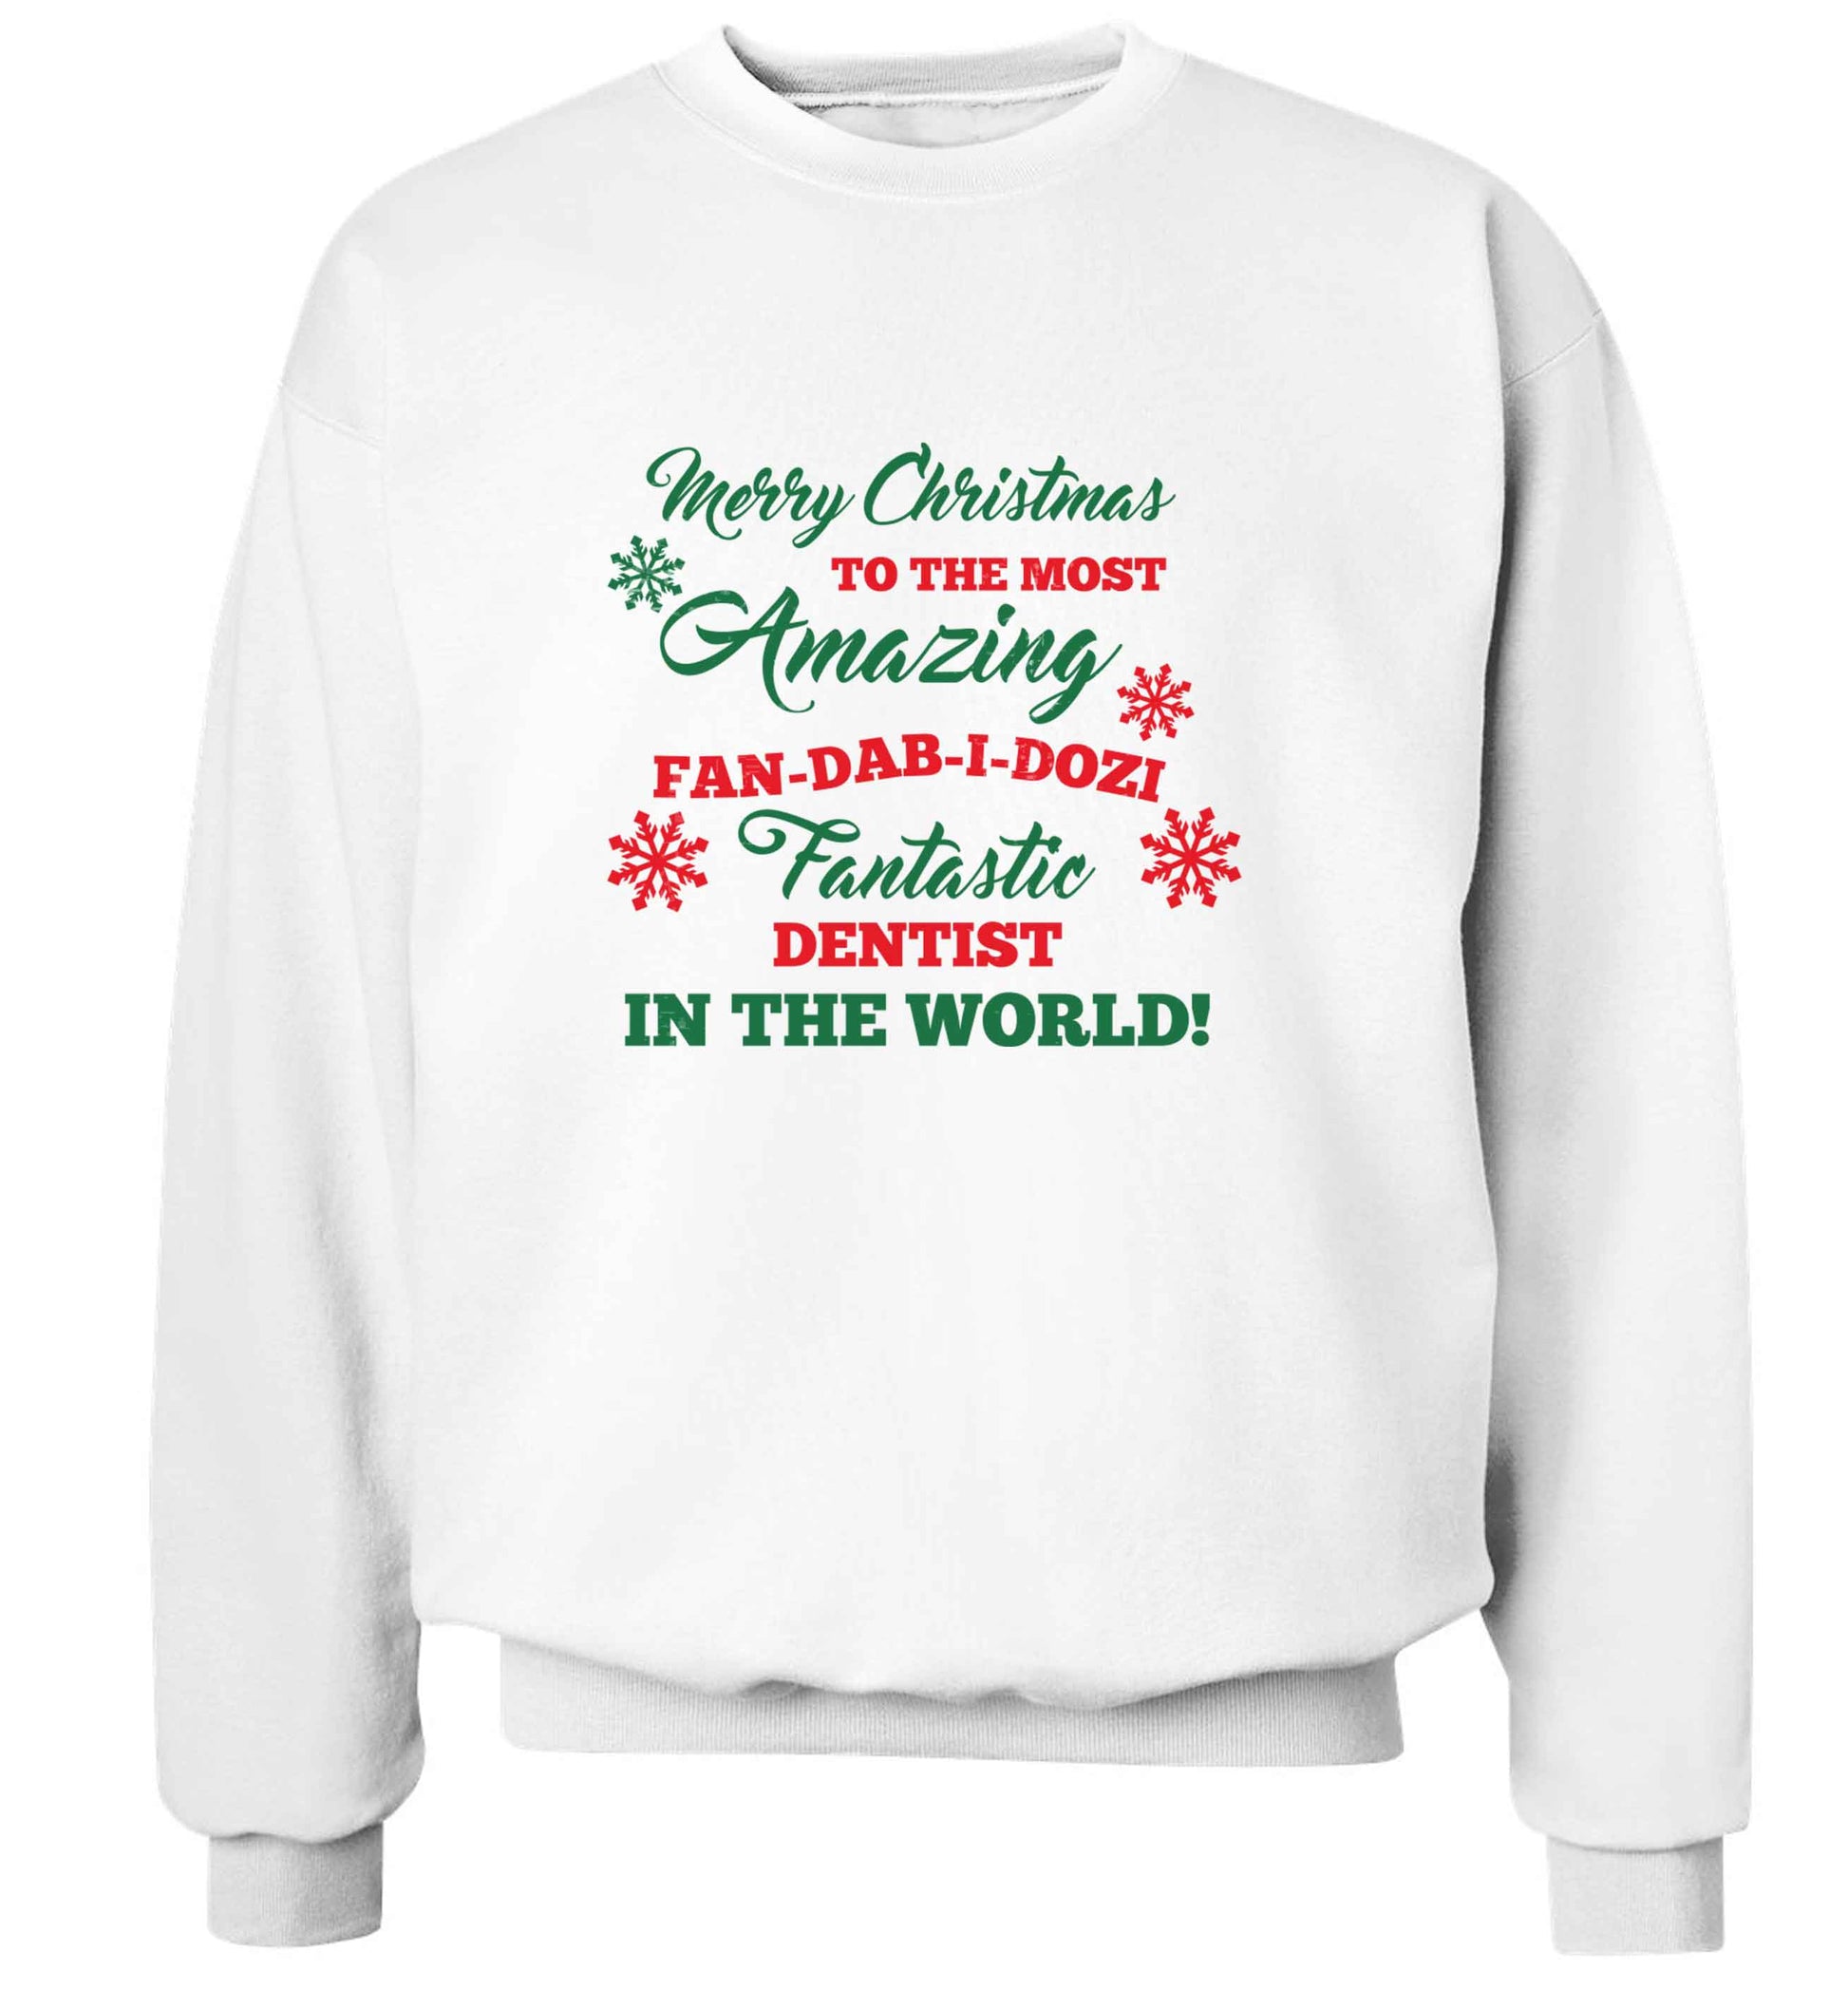 Merry Christmas to the most amazing dentist in the world! adult's unisex white sweater 2XL